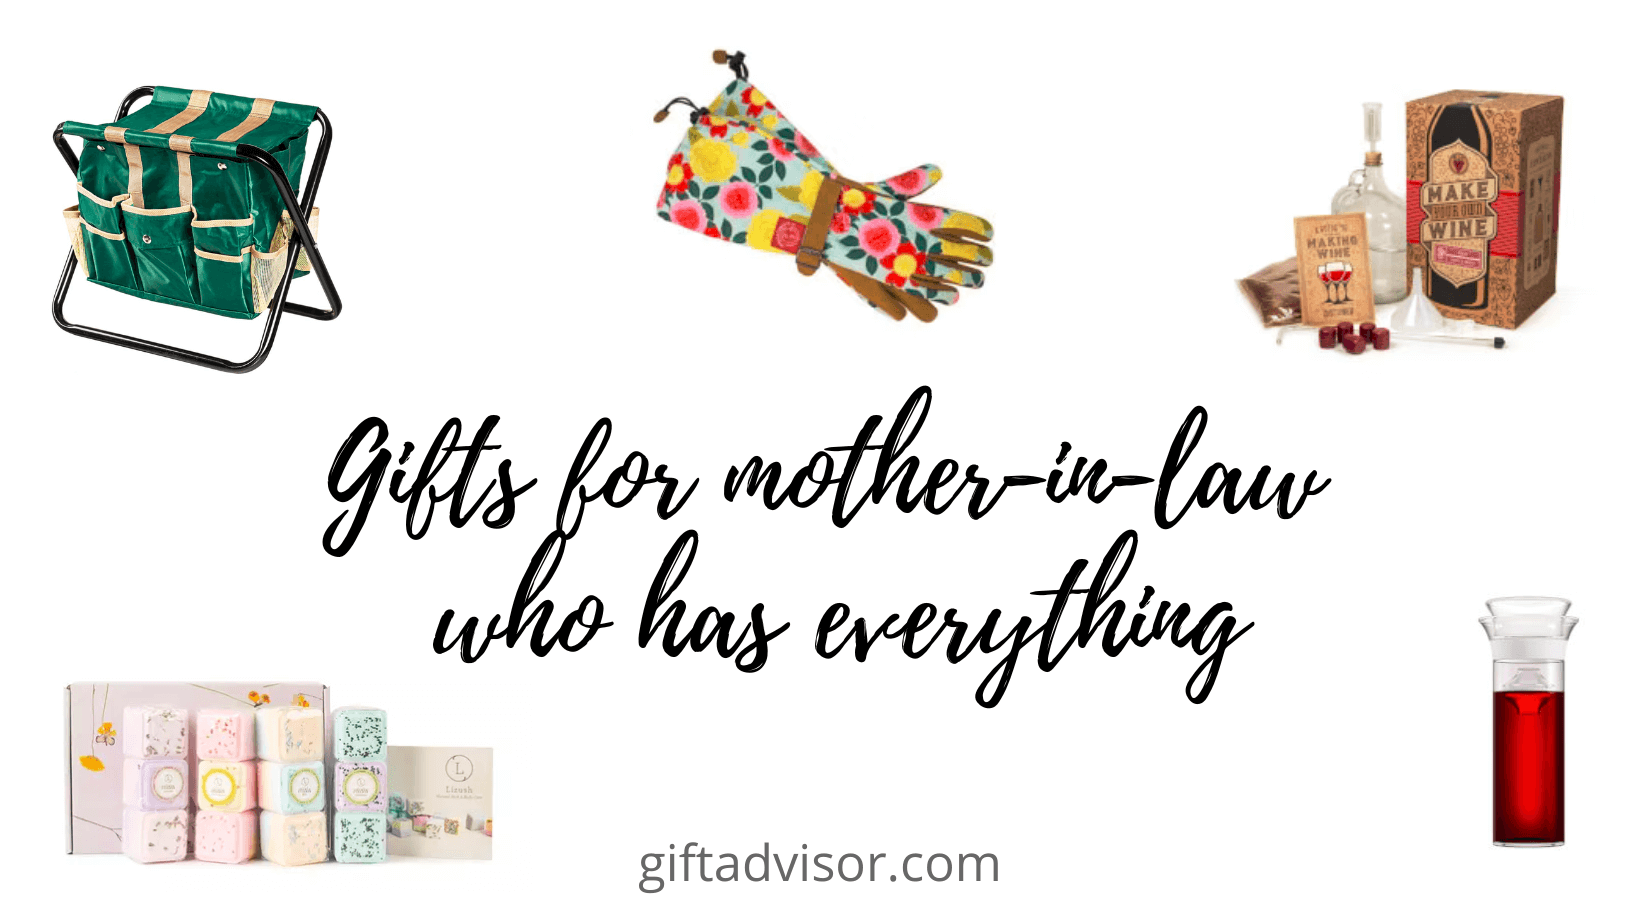 https://giftadvisor.imgix.net/gifts-for-mother-in-law-who-has-everything-min.png?fit=crop&max-w=600&max-h=315